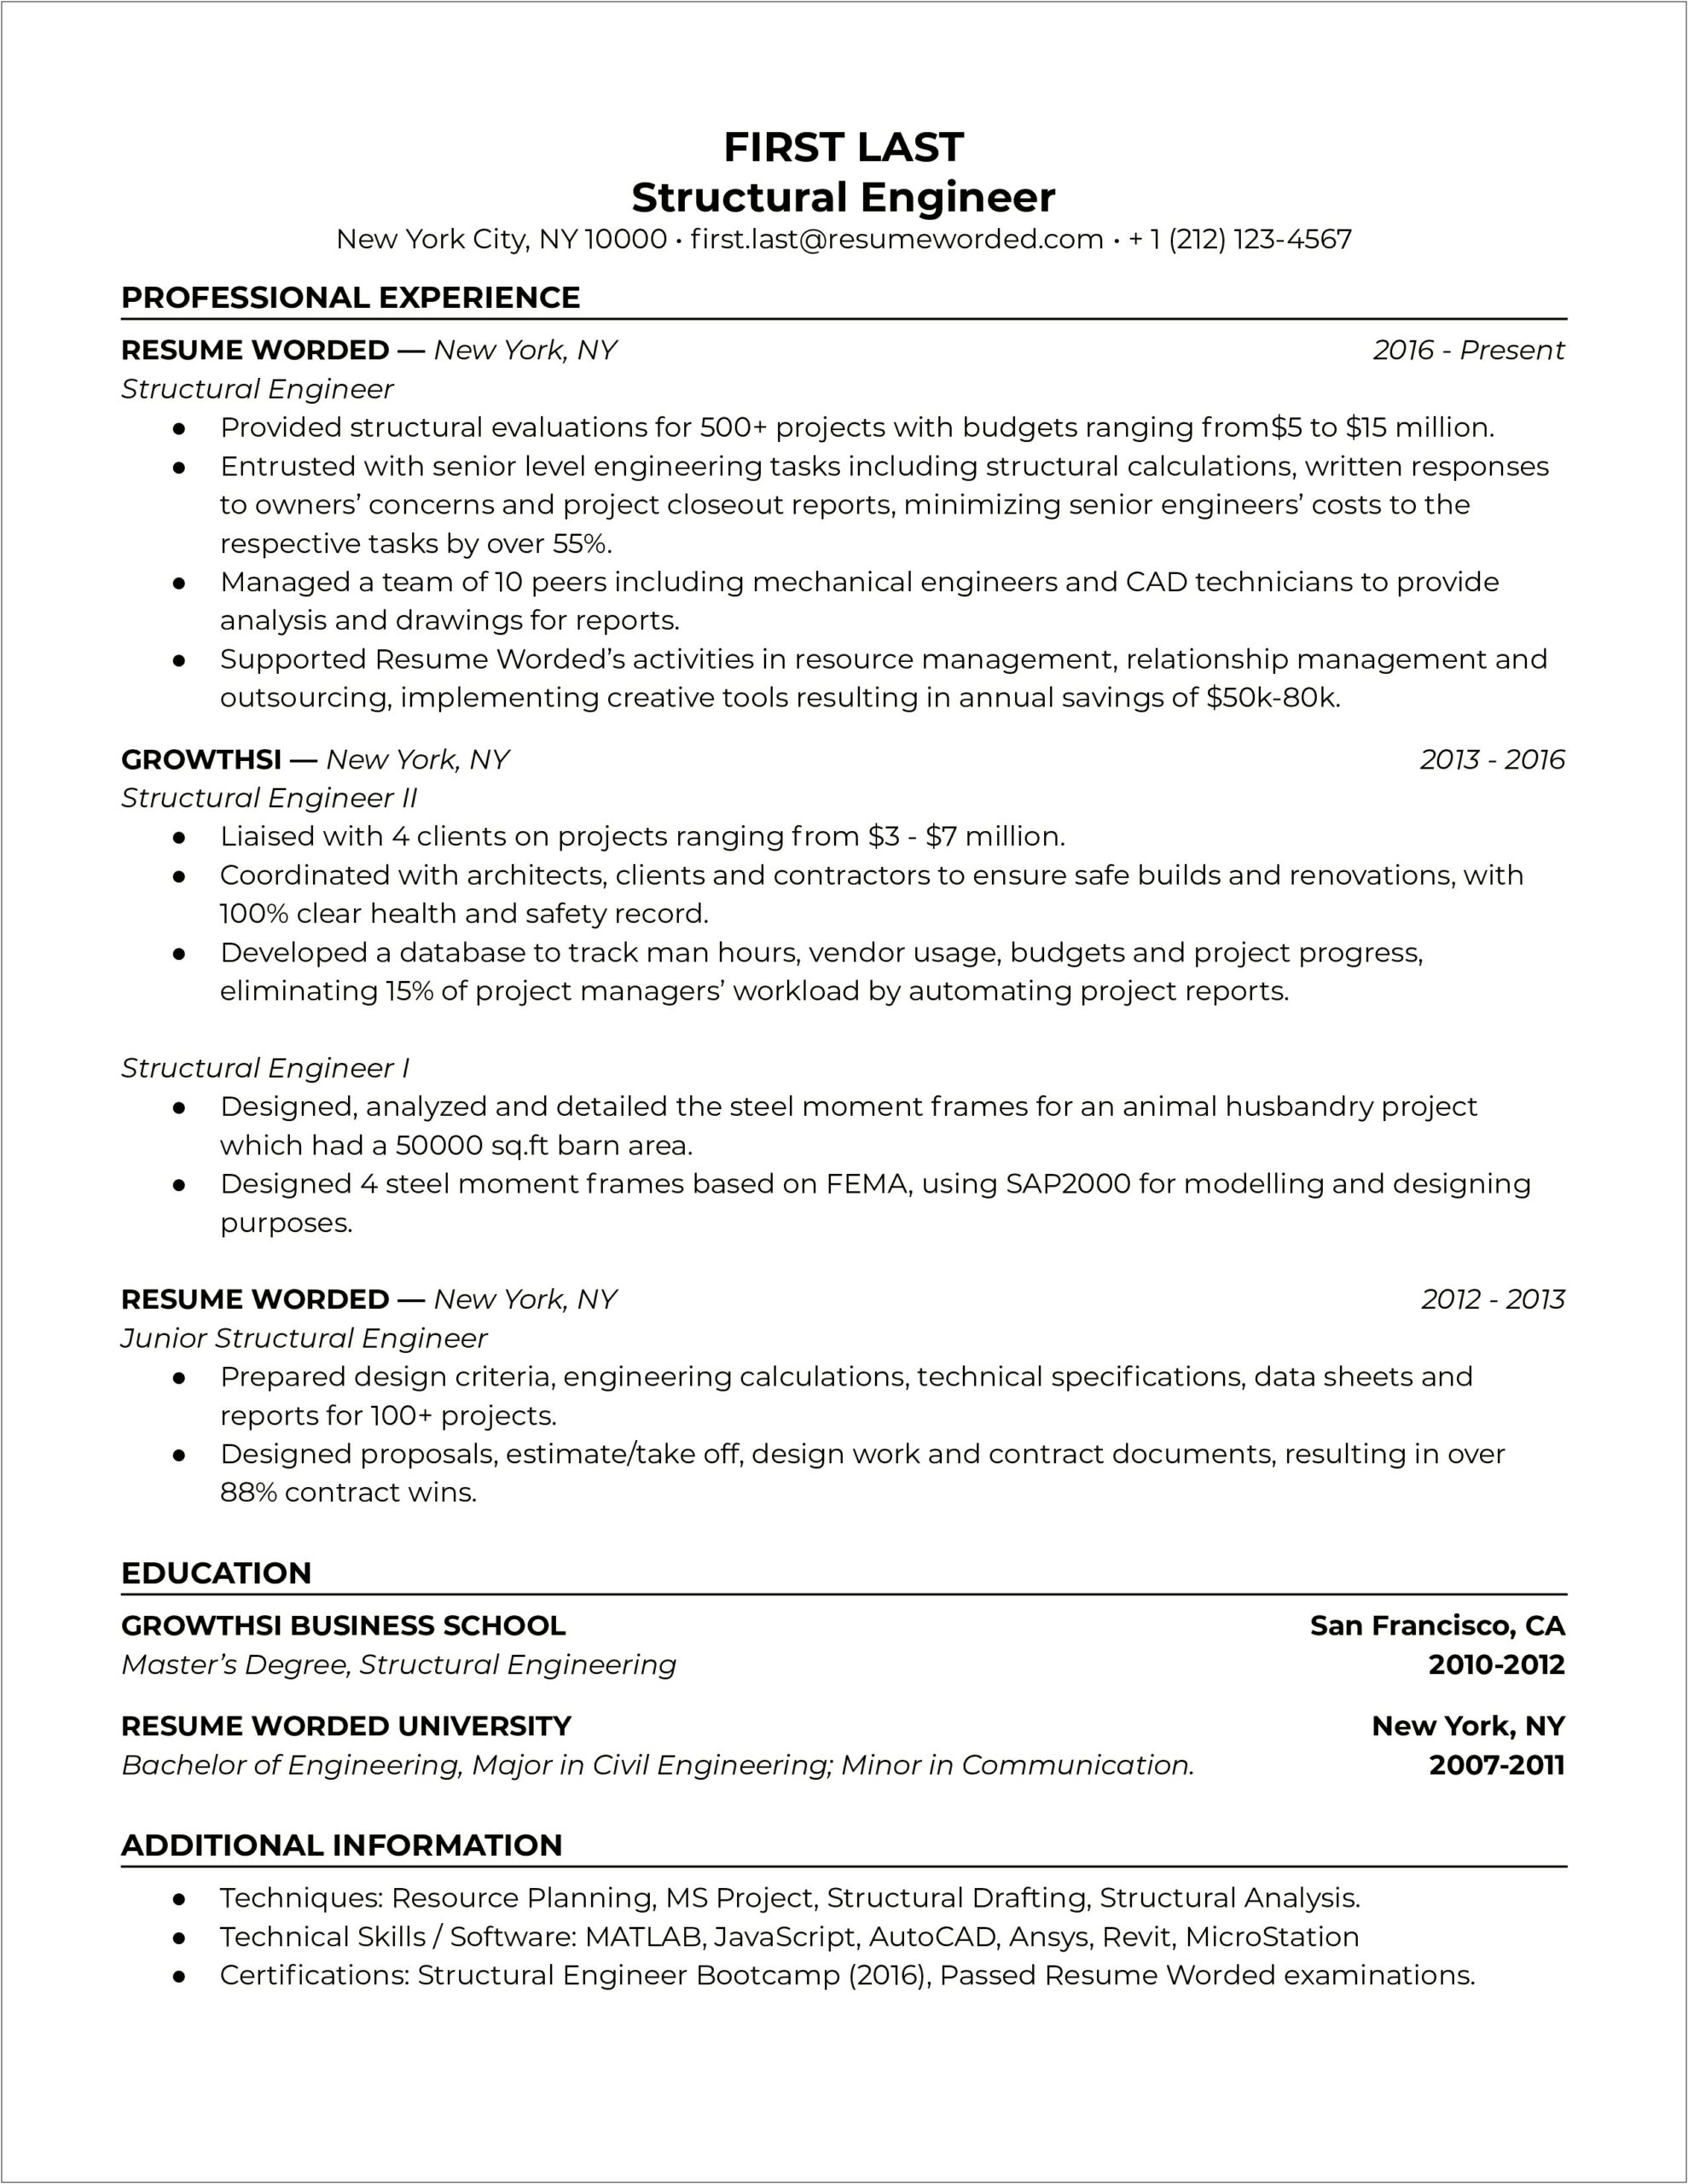 Recent Graduate Structural Engineering Resume Template